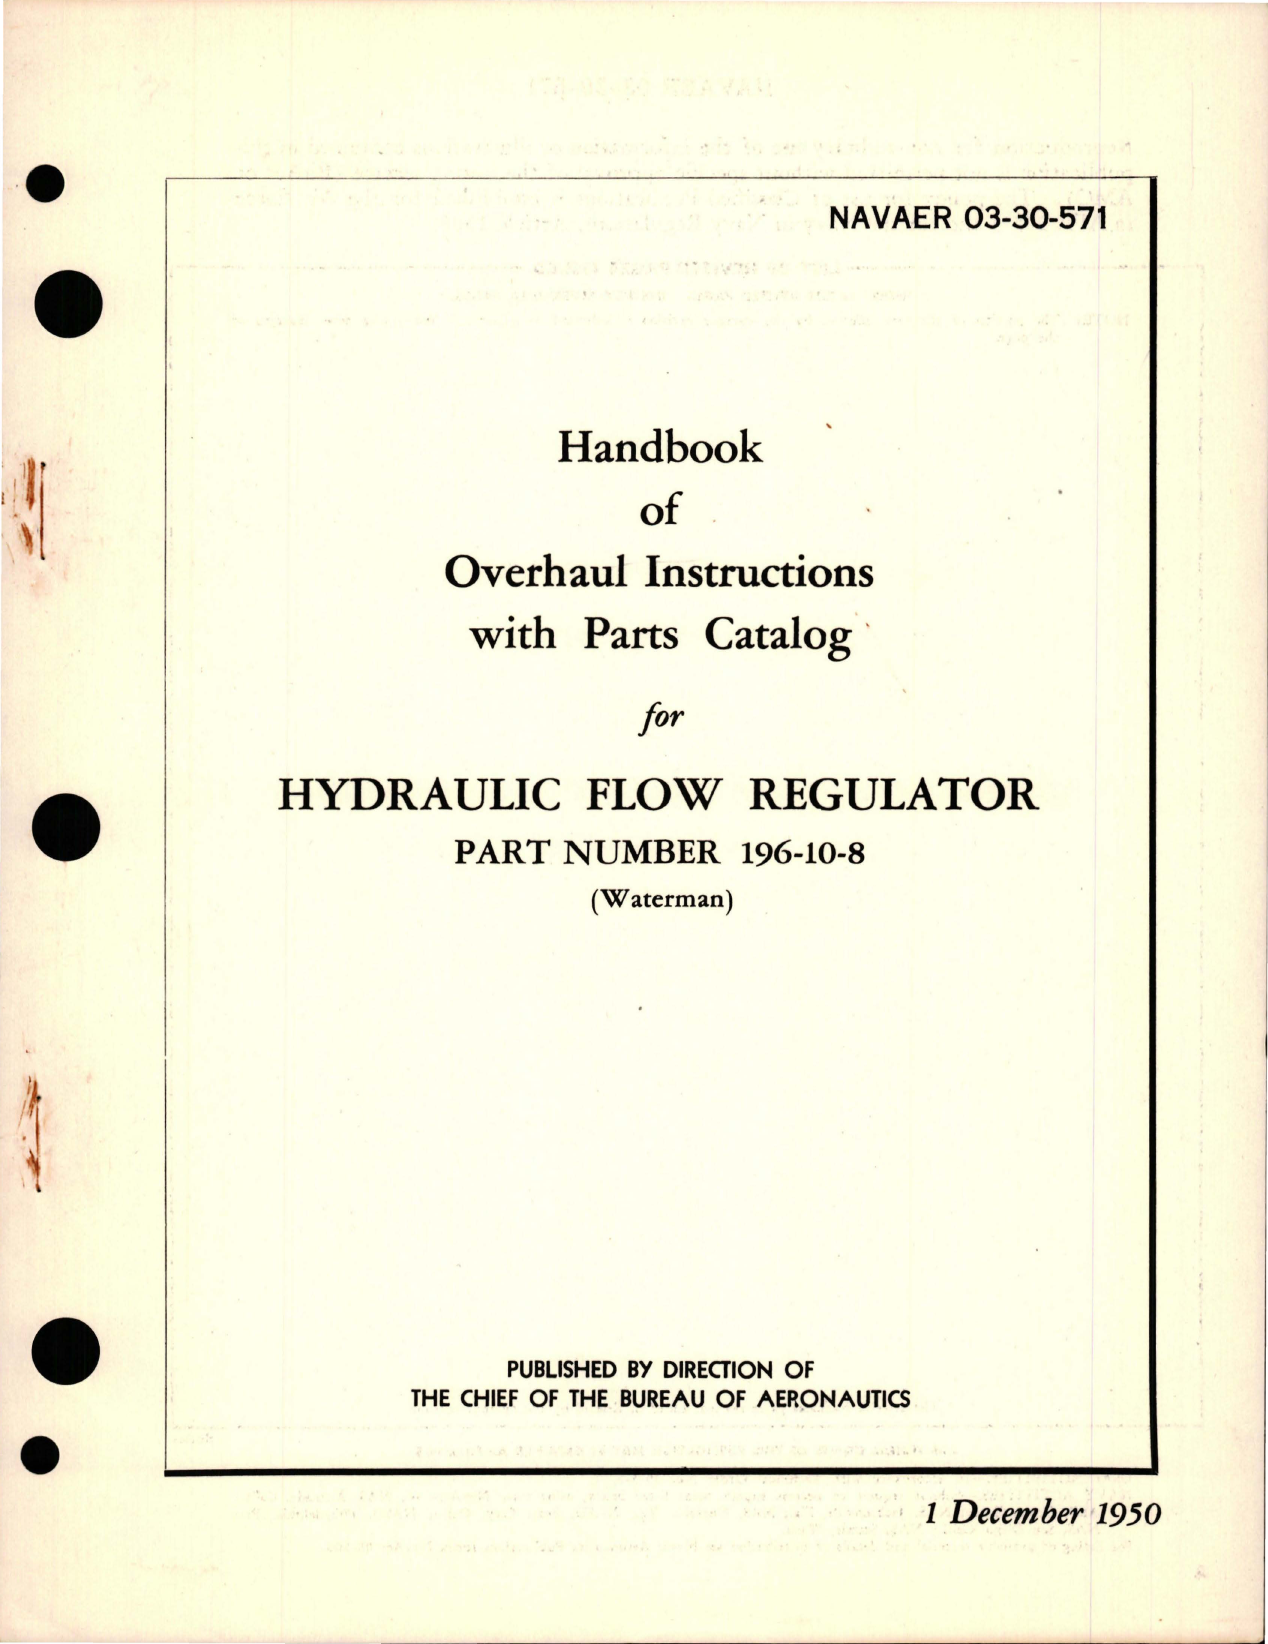 Sample page 1 from AirCorps Library document: Overhaul Instructions with Parts Catalog for Hydraulic Flow Regulator - Part 196-10-8